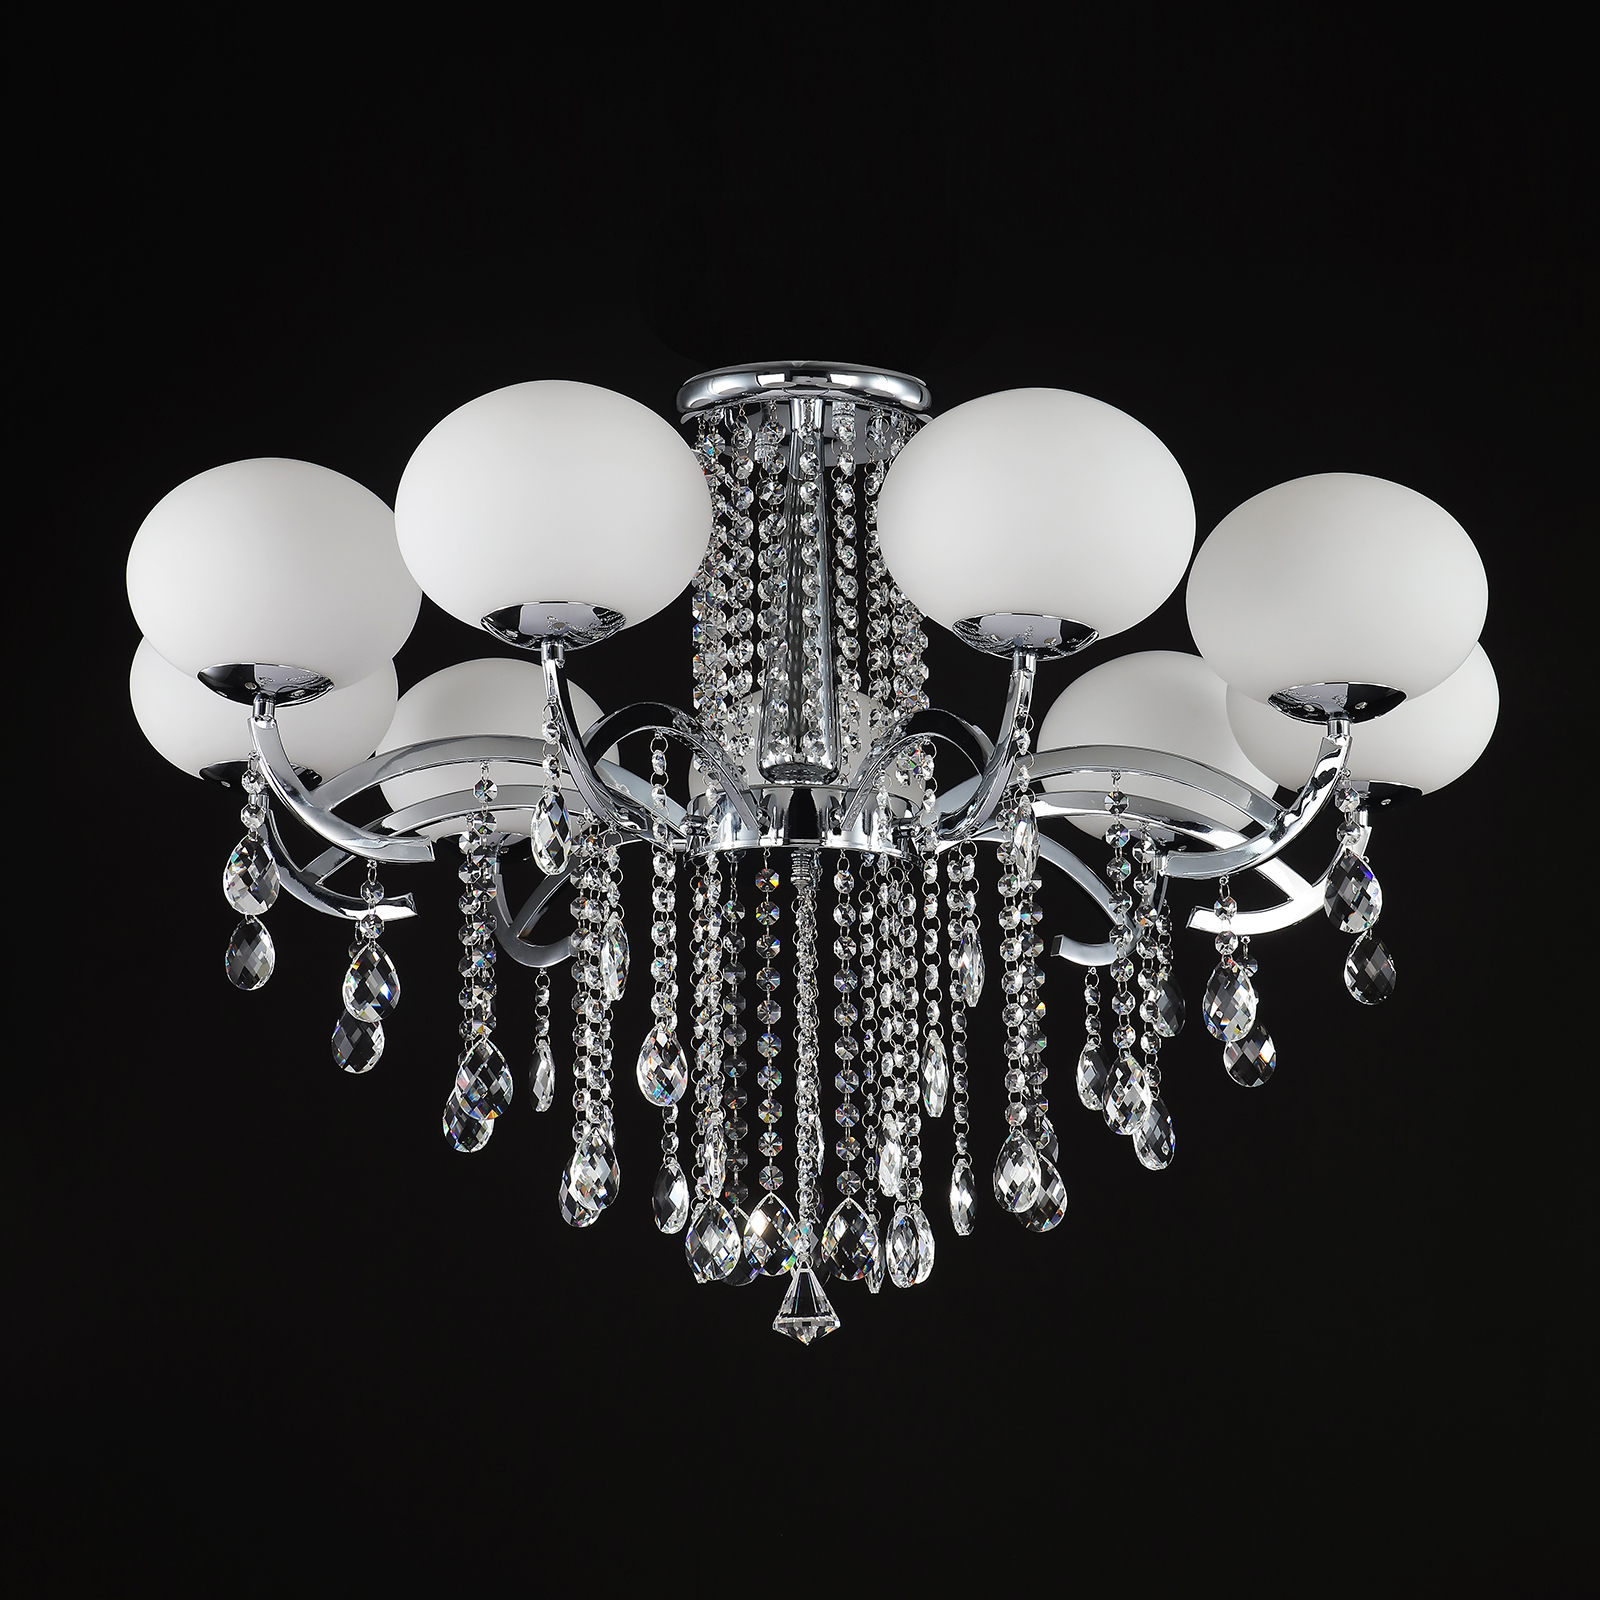 Deluxe European Stylish 9 Light Crystal Ceiling Lamp Pendant Light with regard to dimensions 1600 X 1600